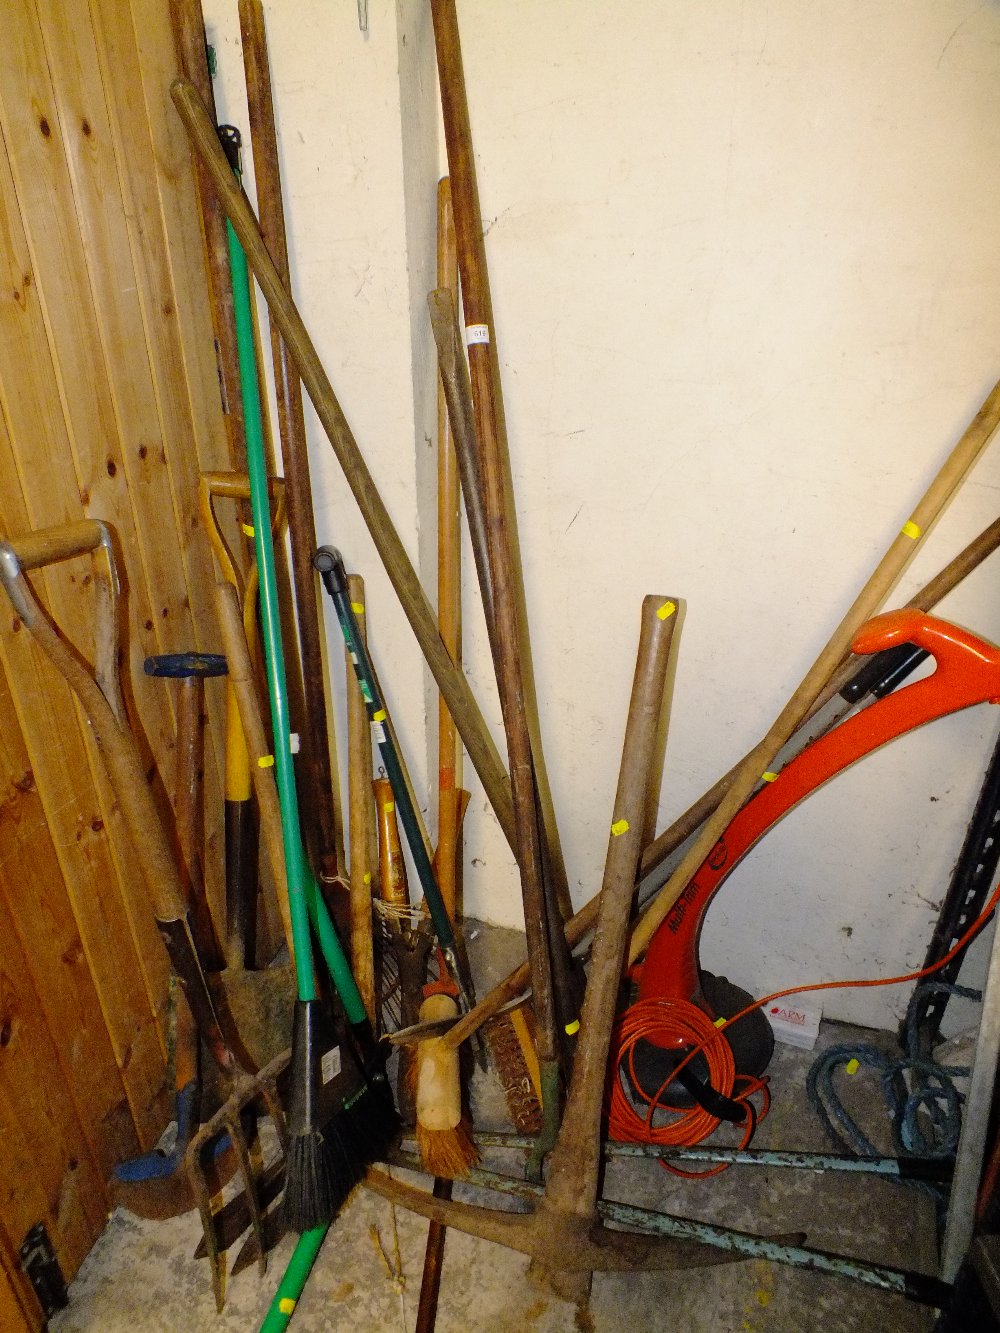 A SELECTION OF GARDEN TOOLS BROOMS ETC